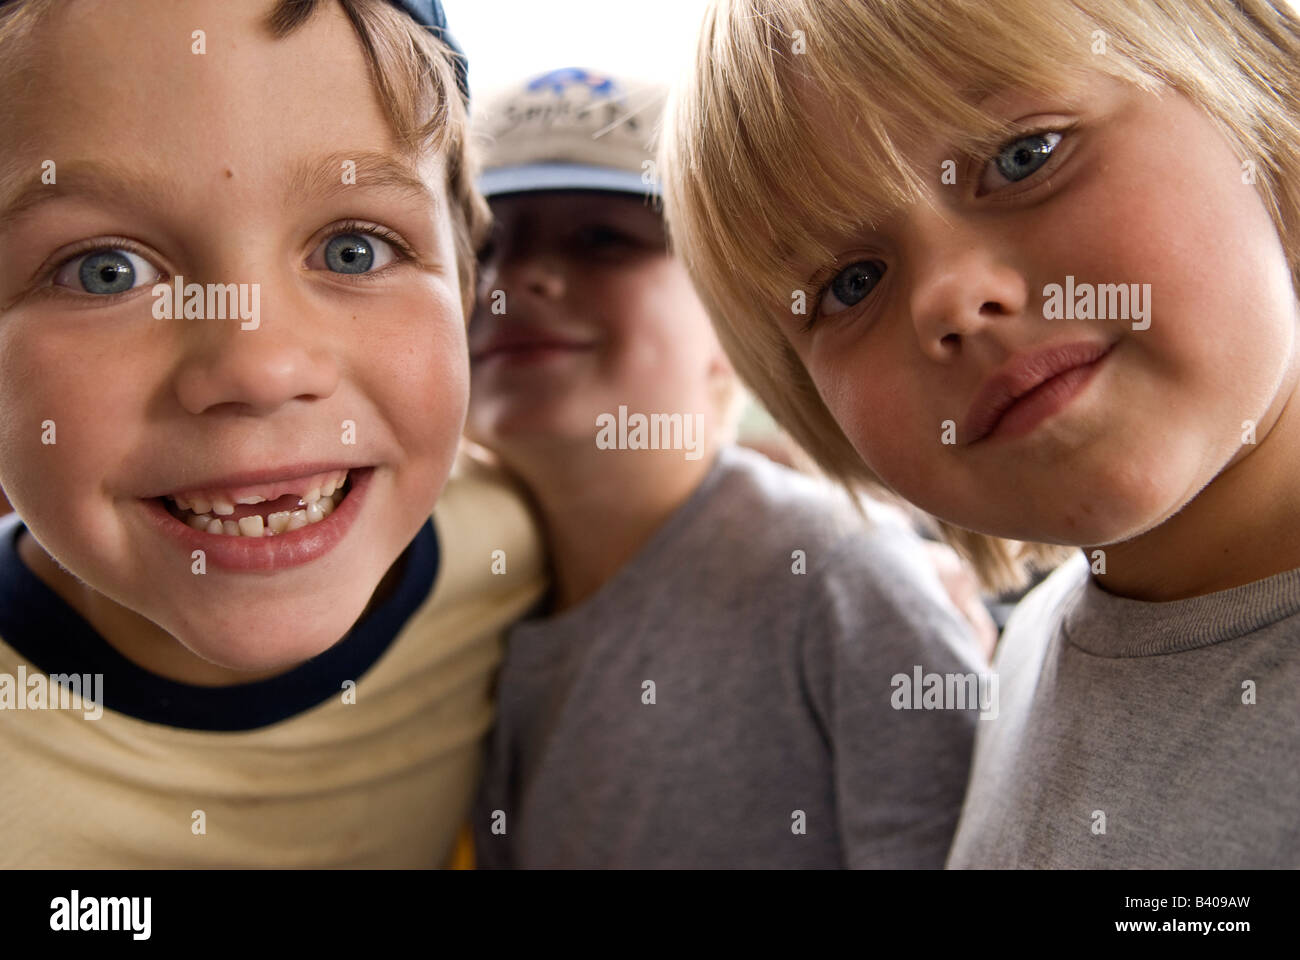 3 young boys look into the camera Stock Photo